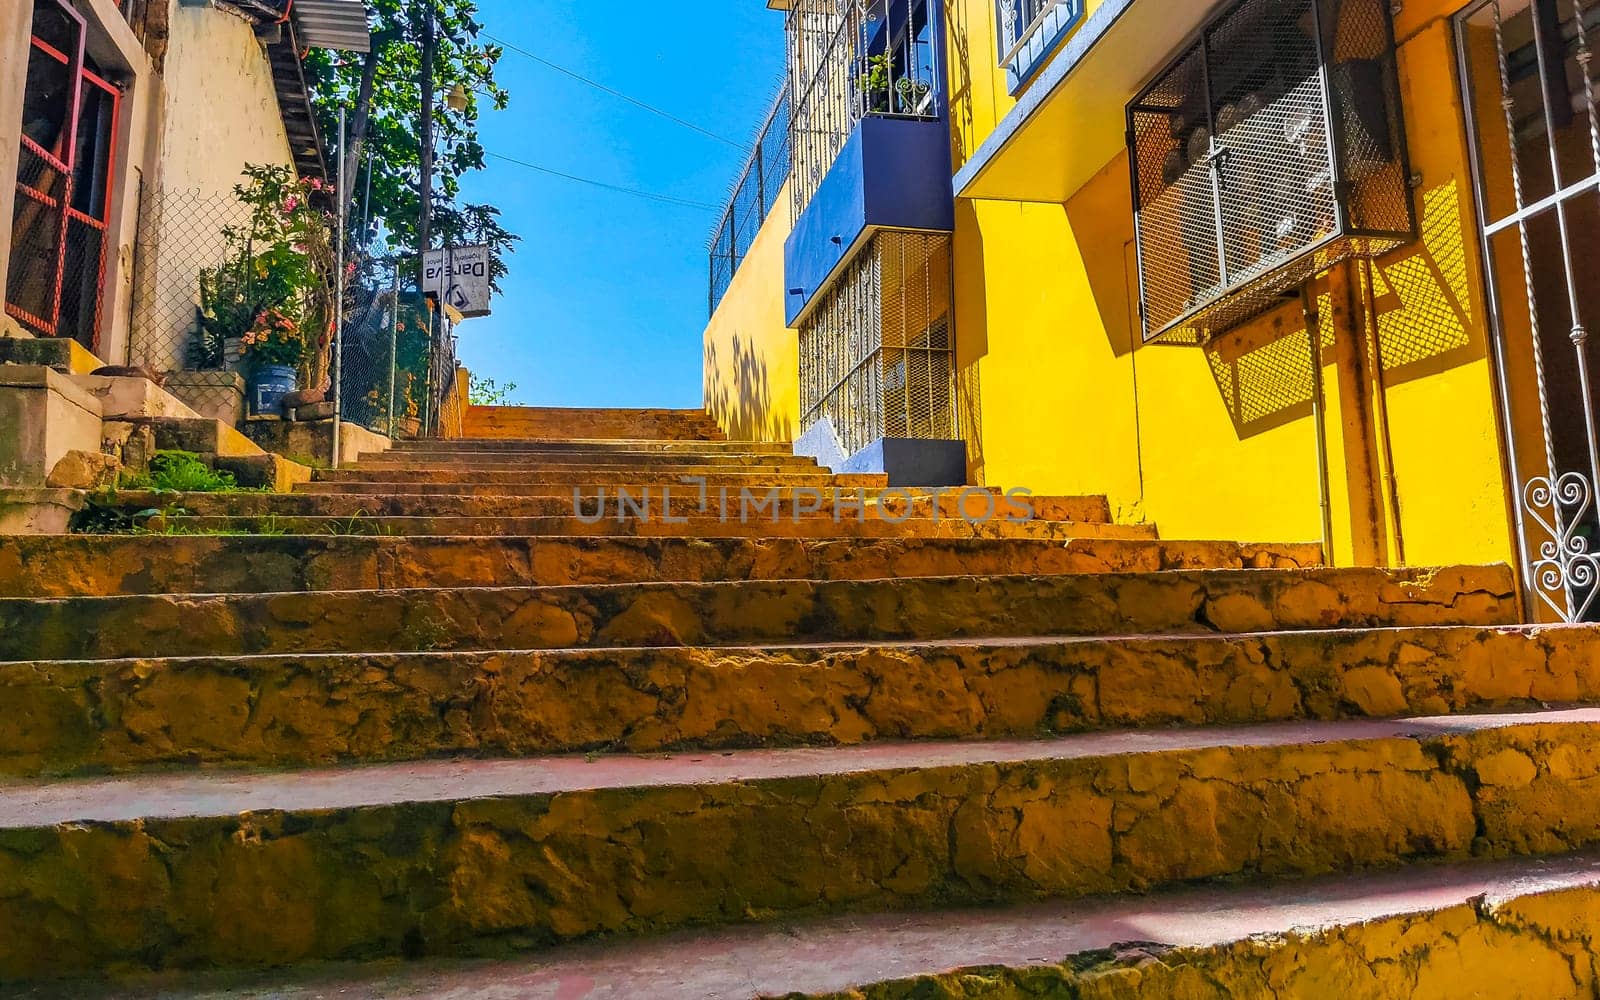 Simple stairs Steps outside in Zicatela Puerto Escondido Oaxaca Mexico.